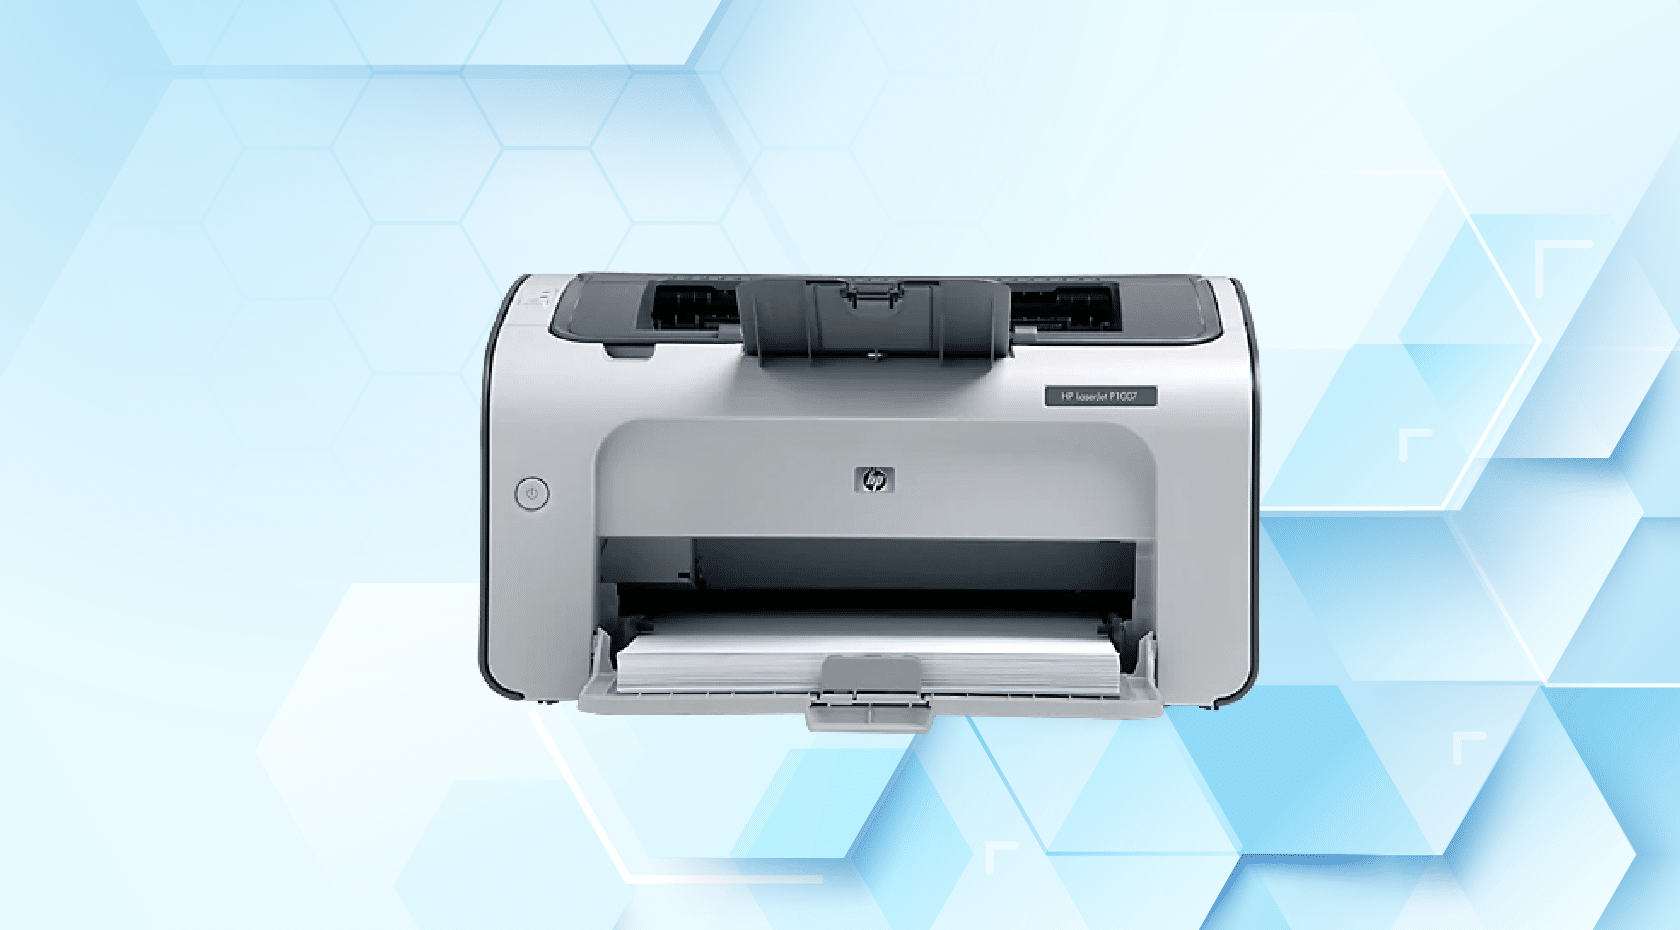 HP LaserJet P1007 Driver Update & Troubleshooting Guide